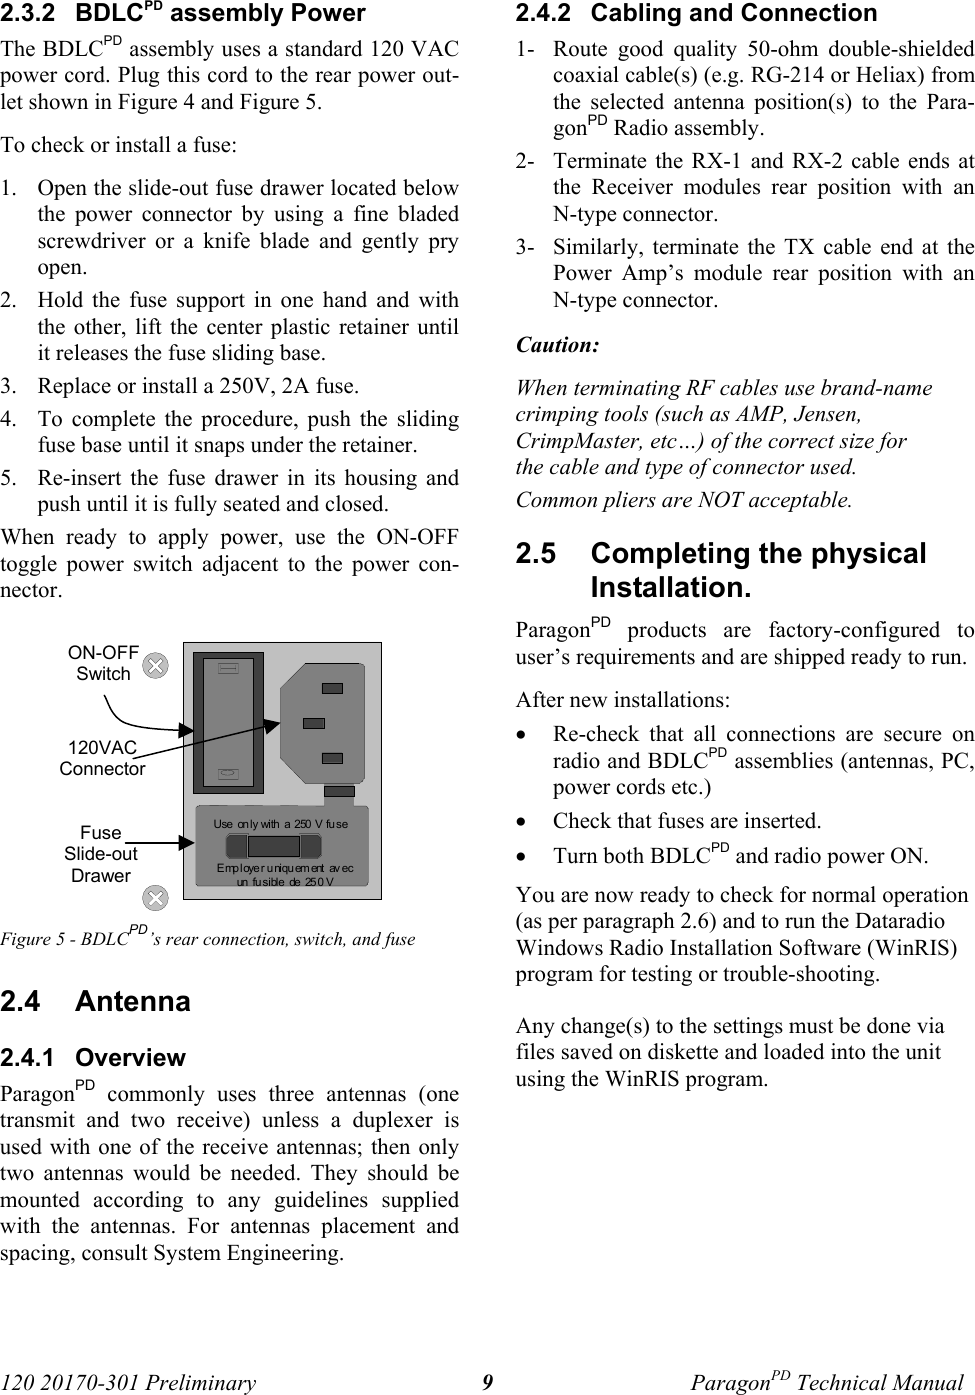 120 20170-301 Preliminary ParagonPD Technical Manual92.3.2  BDLCPD assembly PowerThe BDLCPD assembly uses a standard 120 VACpower cord. Plug this cord to the rear power out-let shown in Figure 4 and Figure 5. To check or install a fuse: 1. Open the slide-out fuse drawer located belowthe power connector by using a fine bladedscrewdriver or a knife blade and gently pryopen. 2. Hold the fuse support in one hand and withthe other, lift the center plastic retainer untilit releases the fuse sliding base. 3. Replace or install a 250V, 2A fuse. 4. To complete the procedure, push the slidingfuse base until it snaps under the retainer.5. Re-insert the fuse drawer in its housing andpush until it is fully seated and closed.When ready to apply power, use the ON-OFFtoggle power switch adjacent to the power con-nector. Figure 5 - BDLCPD’s rear connection, switch, and fuse2.4  Antenna2.4.1  OverviewParagonPD commonly uses three antennas (onetransmit and two receive) unless a duplexer isused with one of the receive antennas; then onlytwo antennas would be needed. They should bemounted according to any guidelines suppliedwith the antennas. For antennas placement andspacing, consult System Engineering. 2.4.2  Cabling and Connection1- Route good quality 50-ohm double-shieldedcoaxial cable(s) (e.g. RG-214 or Heliax) fromthe selected antenna position(s) to the Para-gonPD Radio assembly.2- Terminate the RX-1 and RX-2 cable ends atthe Receiver modules rear position with anN-type connector.3- Similarly, terminate the TX cable end at thePower Amp’s module rear position with anN-type connector.Caution: When terminating RF cables use brand-namecrimping tools (such as AMP, Jensen,CrimpMaster, etc…) of the correct size forthe cable and type of connector used.Common pliers are NOT acceptable.2.5  Completing the physicalInstallation.ParagonPD products are factory-configured touser’s requirements and are shipped ready to run. After new installations:• Re-check that all connections are secure onradio and BDLCPD assemblies (antennas, PC,power cords etc.)• Check that fuses are inserted.• Turn both BDLCPD and radio power ON.You are now ready to check for normal operation(as per paragraph 2.6) and to run the DataradioWindows Radio Installation Software (WinRIS)program for testing or trouble-shooting.Any change(s) to the settings must be done viafiles saved on diskette and loaded into the unitusing the WinRIS program.Employer uniquement  avecun  fu si bl e  de  25 0 VUse  on ly with  a  250  V  fu seON-OFFSwitch120VACConnectorFuseSlide-outDrawer